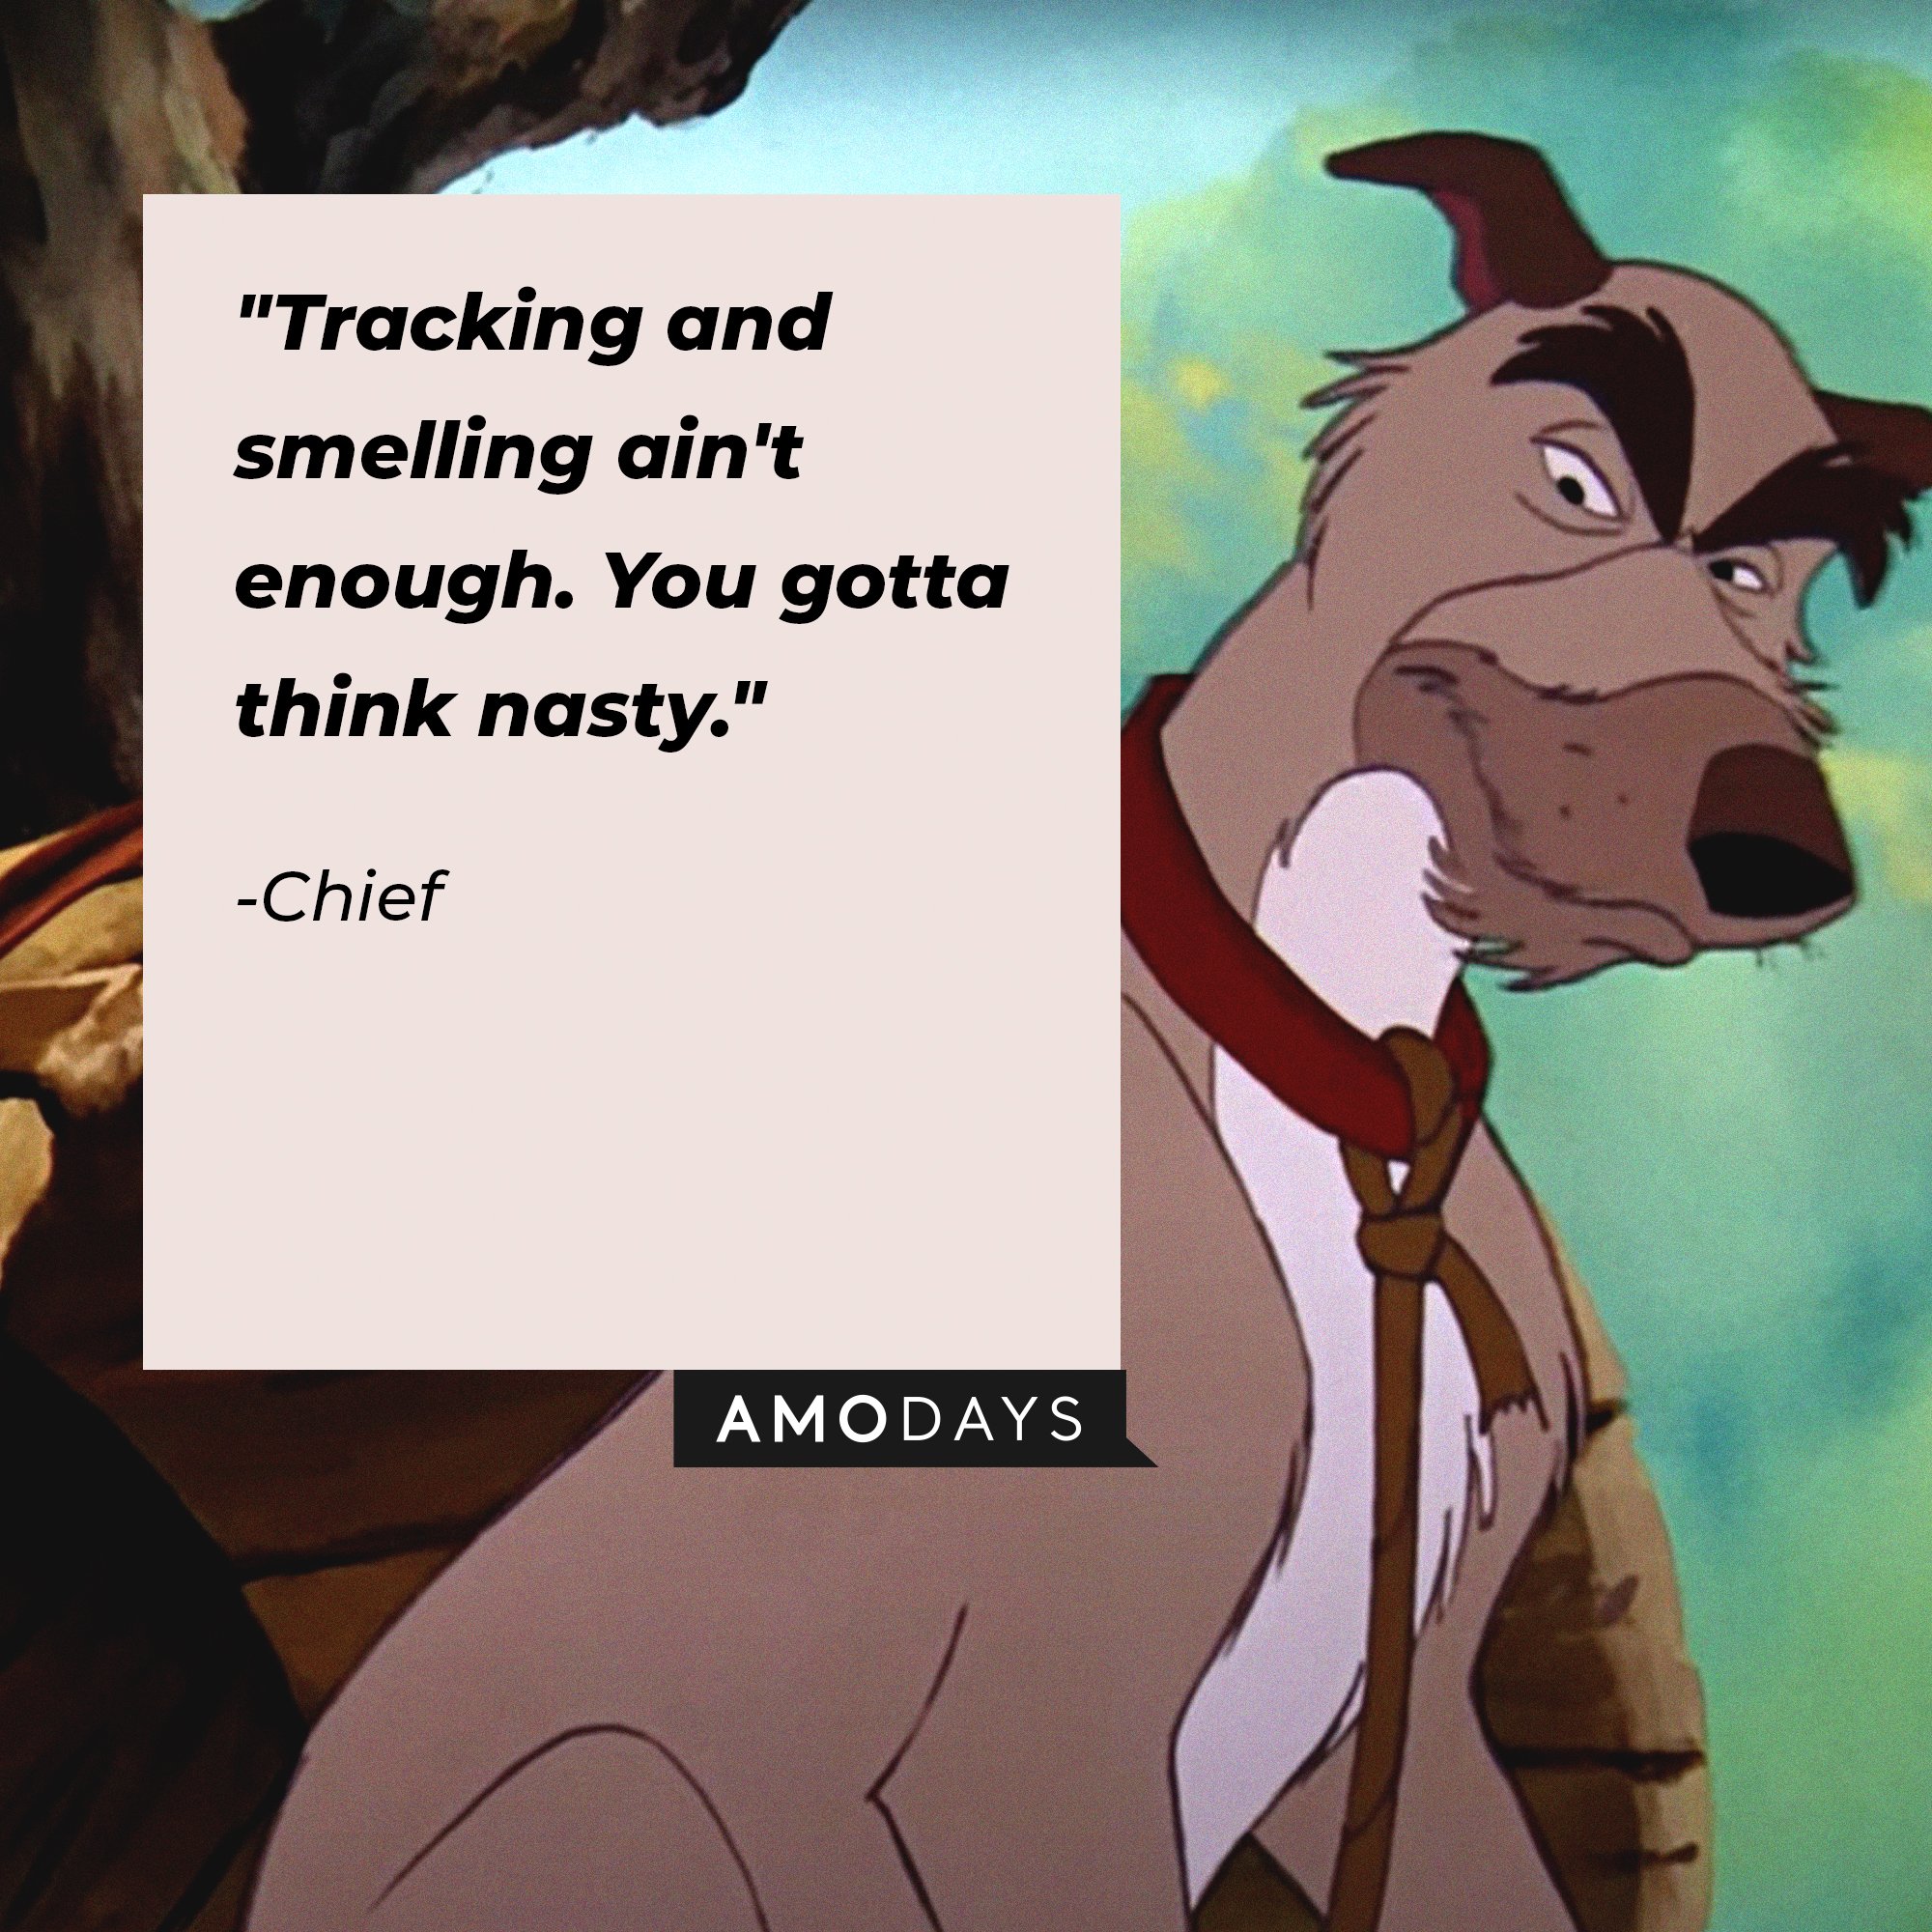 Chief’s quote: "Tracking and smelling ain't enough. You gotta think nasty." | Image: AmoDays